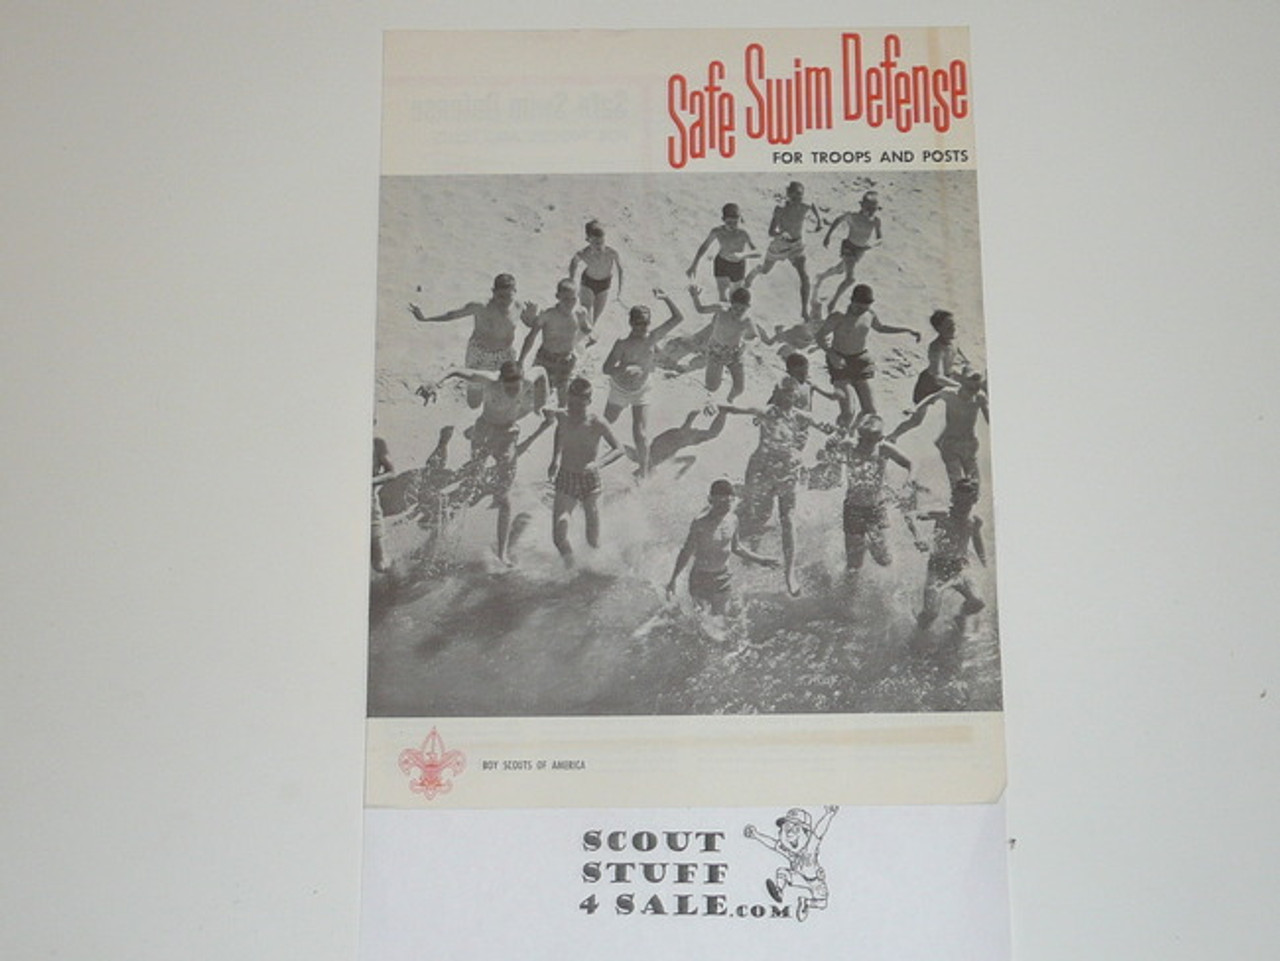 1967 Safe Swim Defense for Troops and Posts